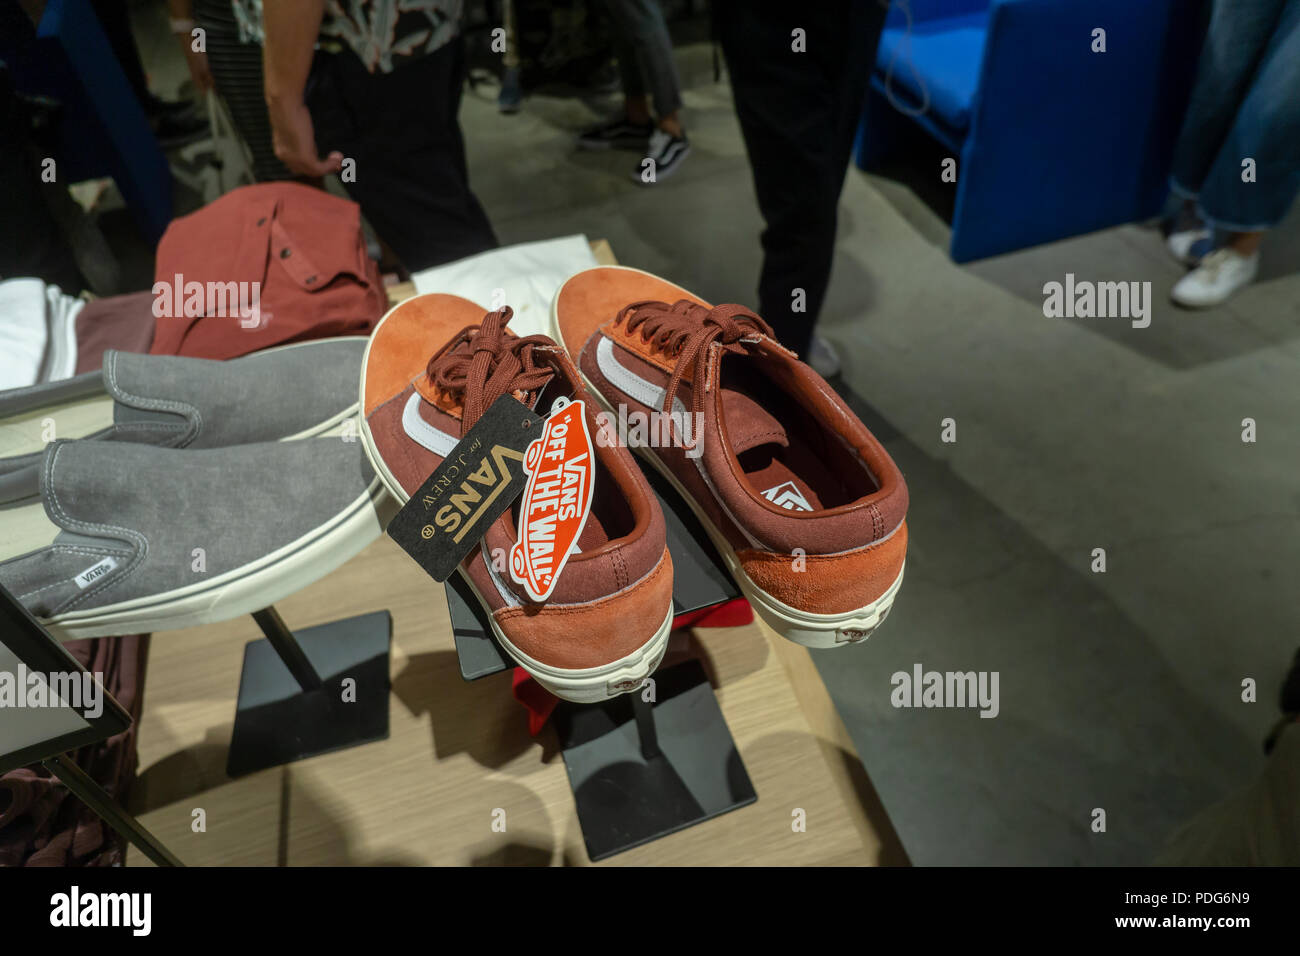 Vans brand on display the opening celebration of new J. Crew men's store in the Dumbo neighborhood of Brooklyn in York on Wednesday, August 2018. The 2,100 square